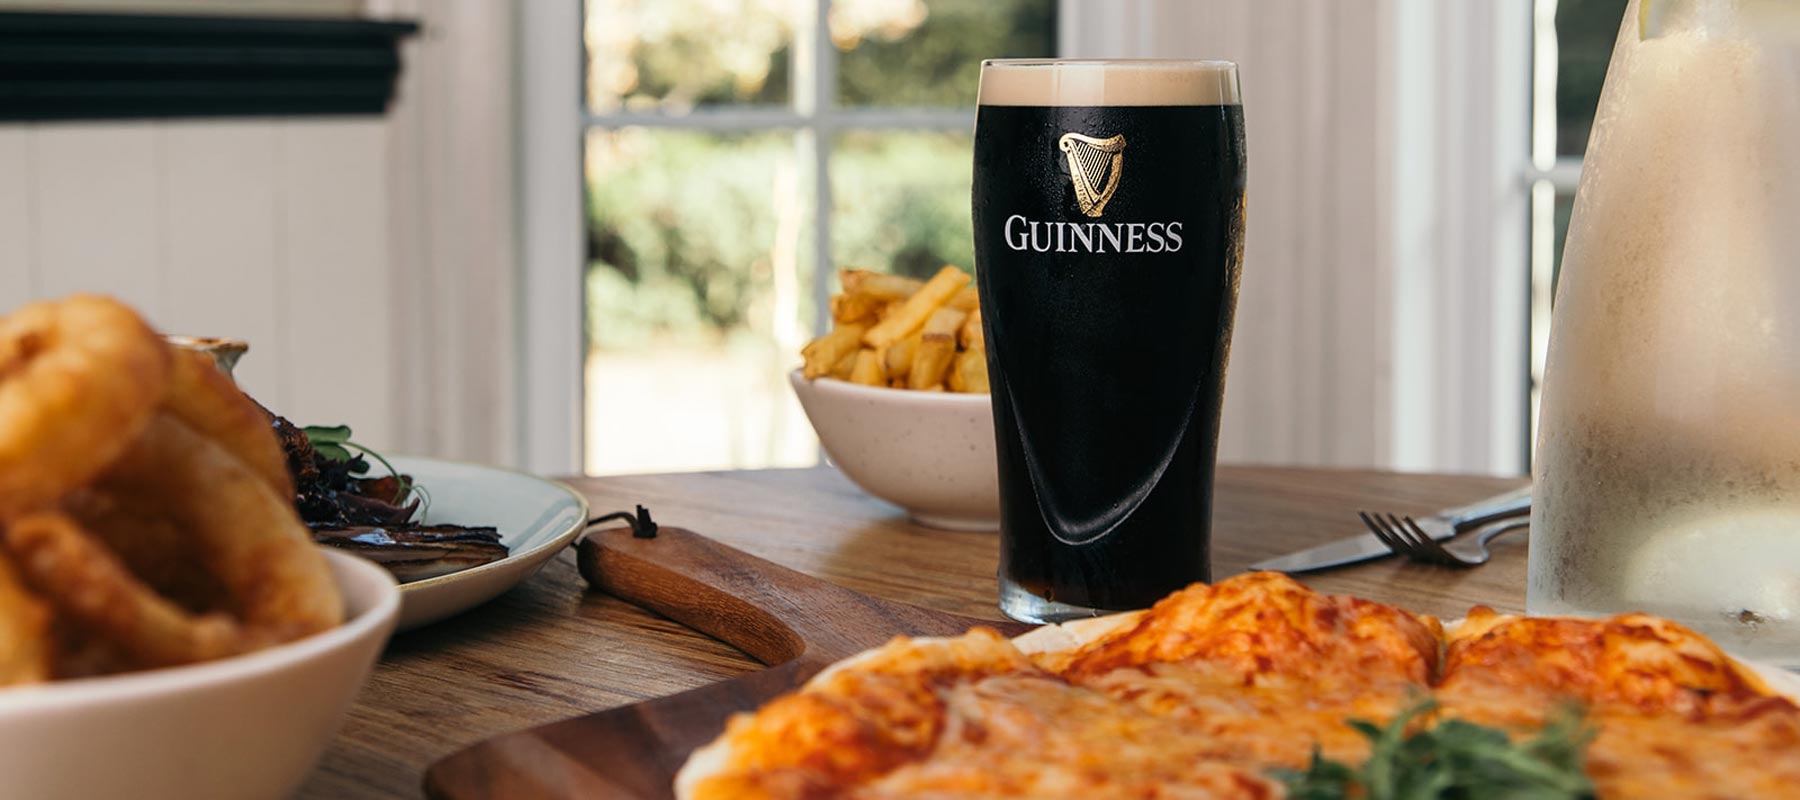 Meal and a pint of Guinness